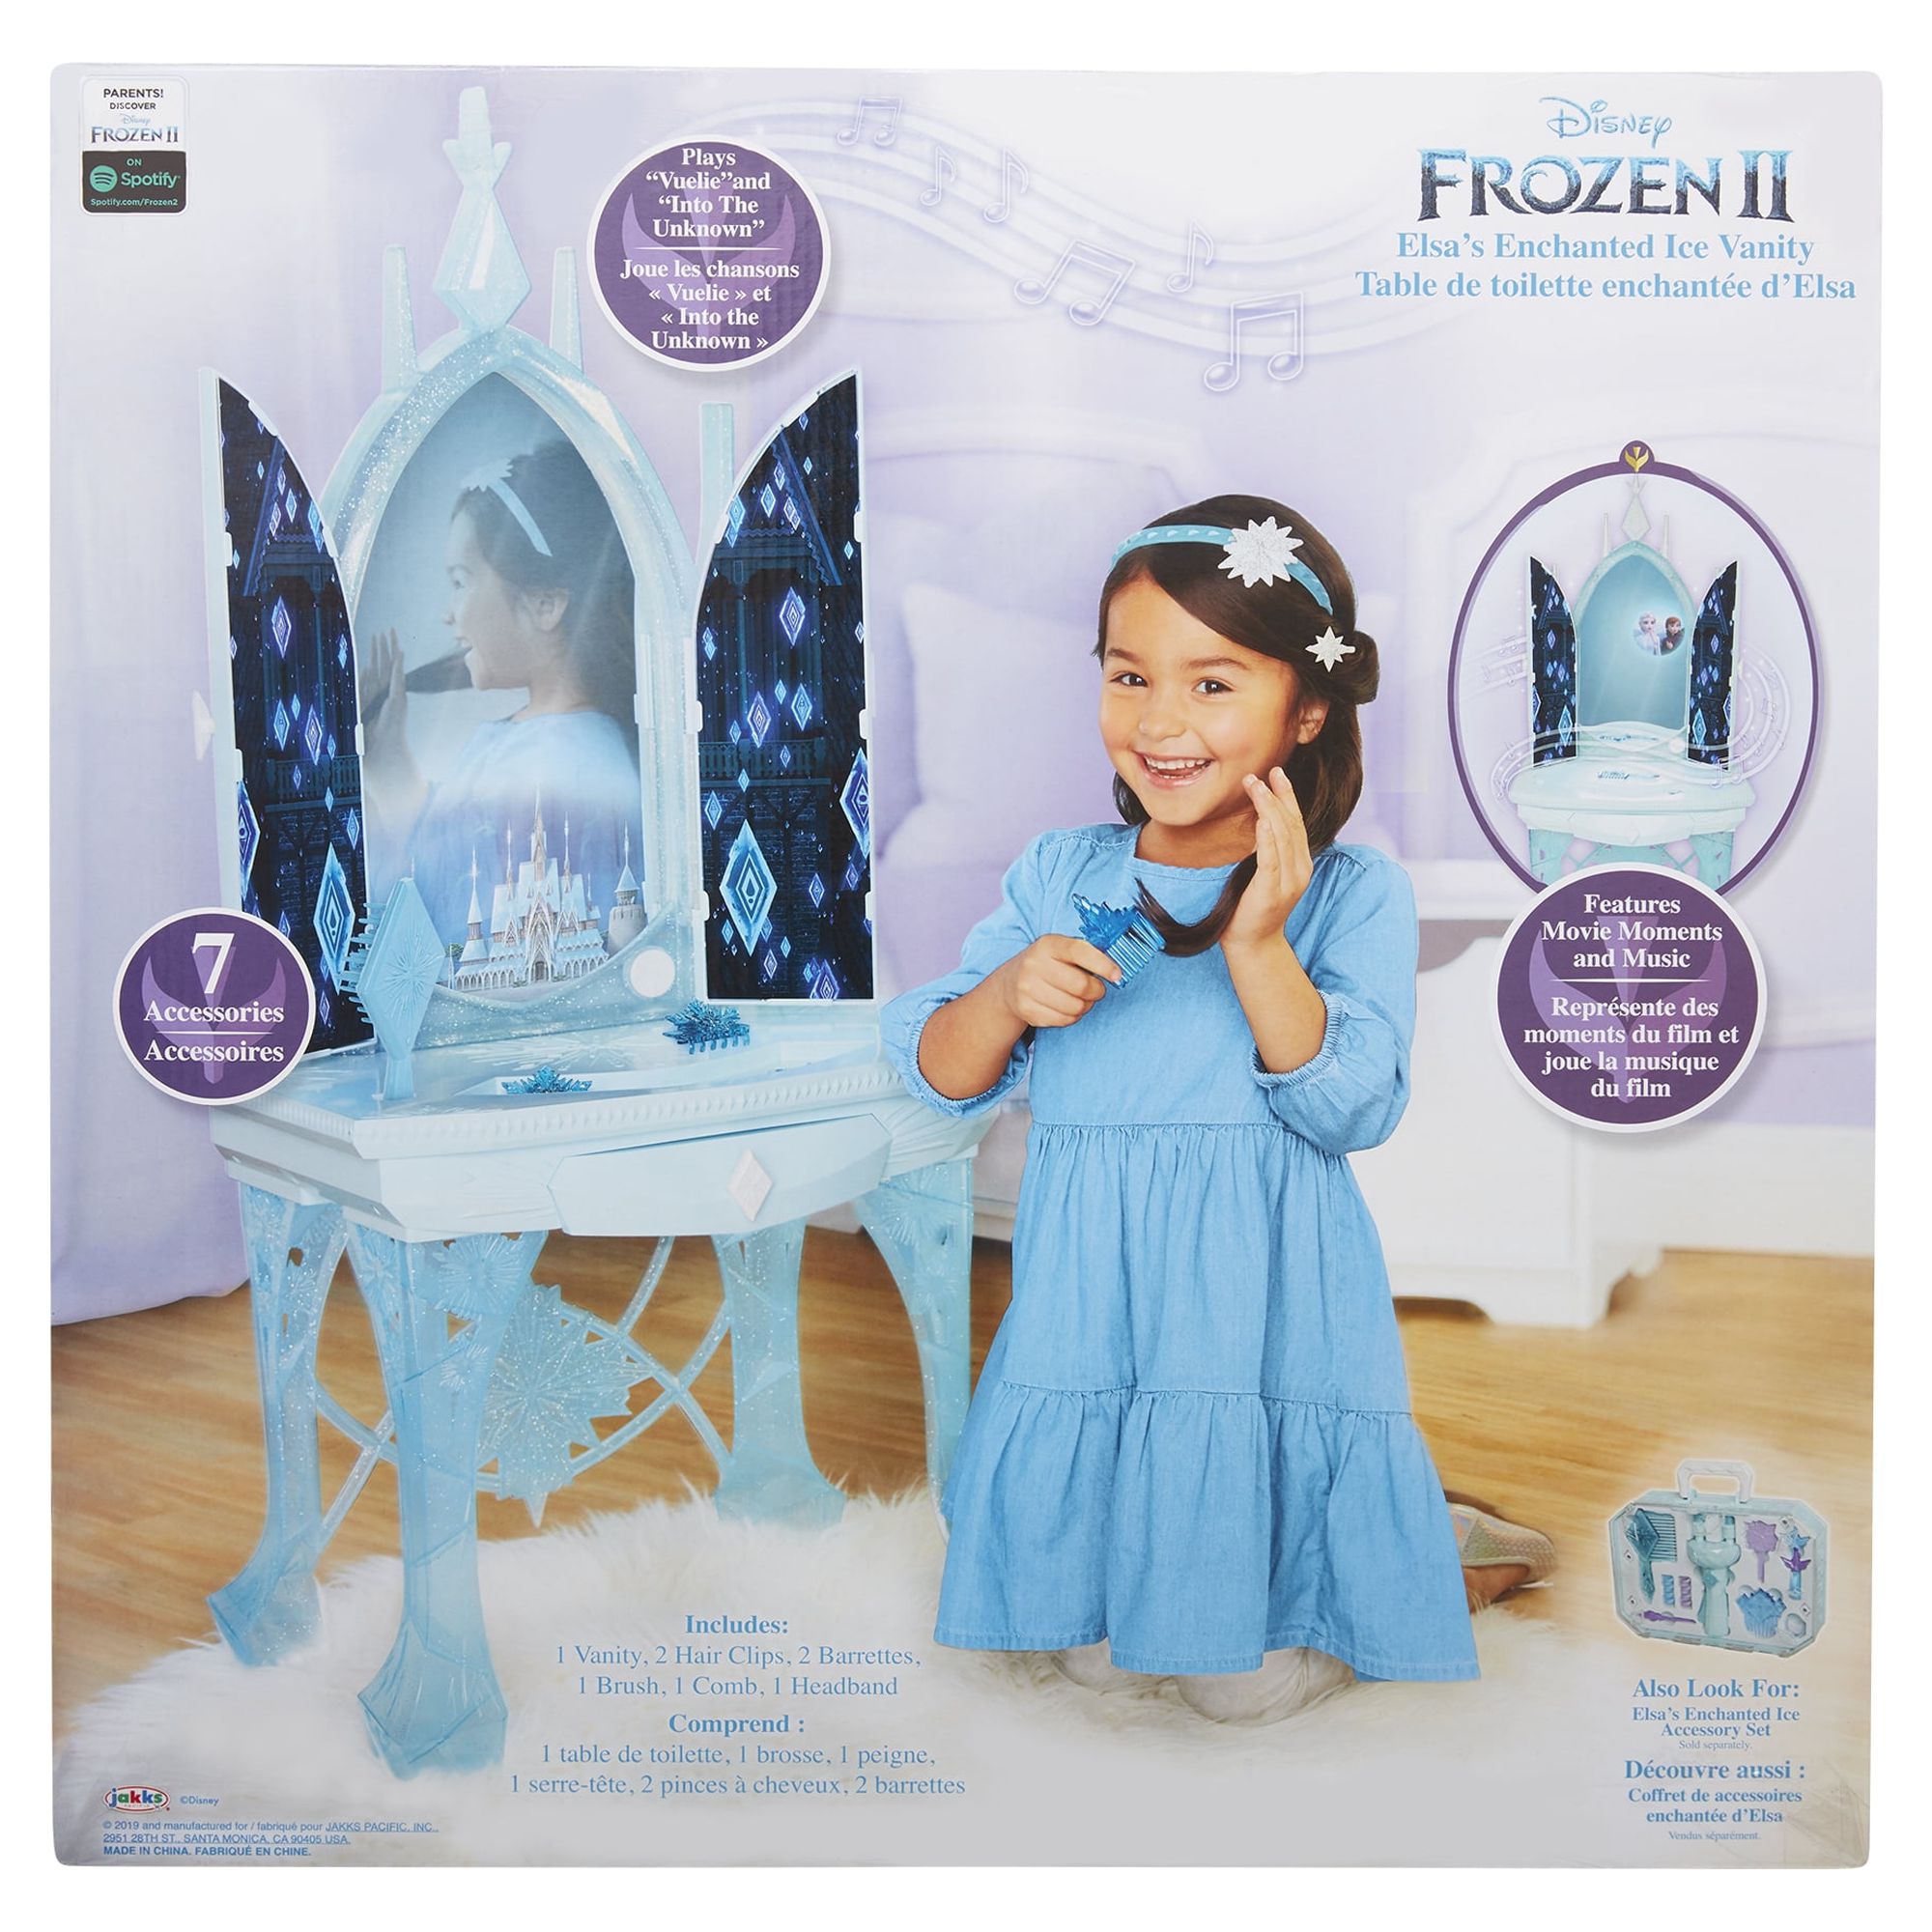 Disney Frozen 2 Elsa's Enchanted Ice Vanity Includes Lights Iconic Story Moments & Plays "Vuelie" and "Into the Unknown" For Ages 3+ - image 4 of 6